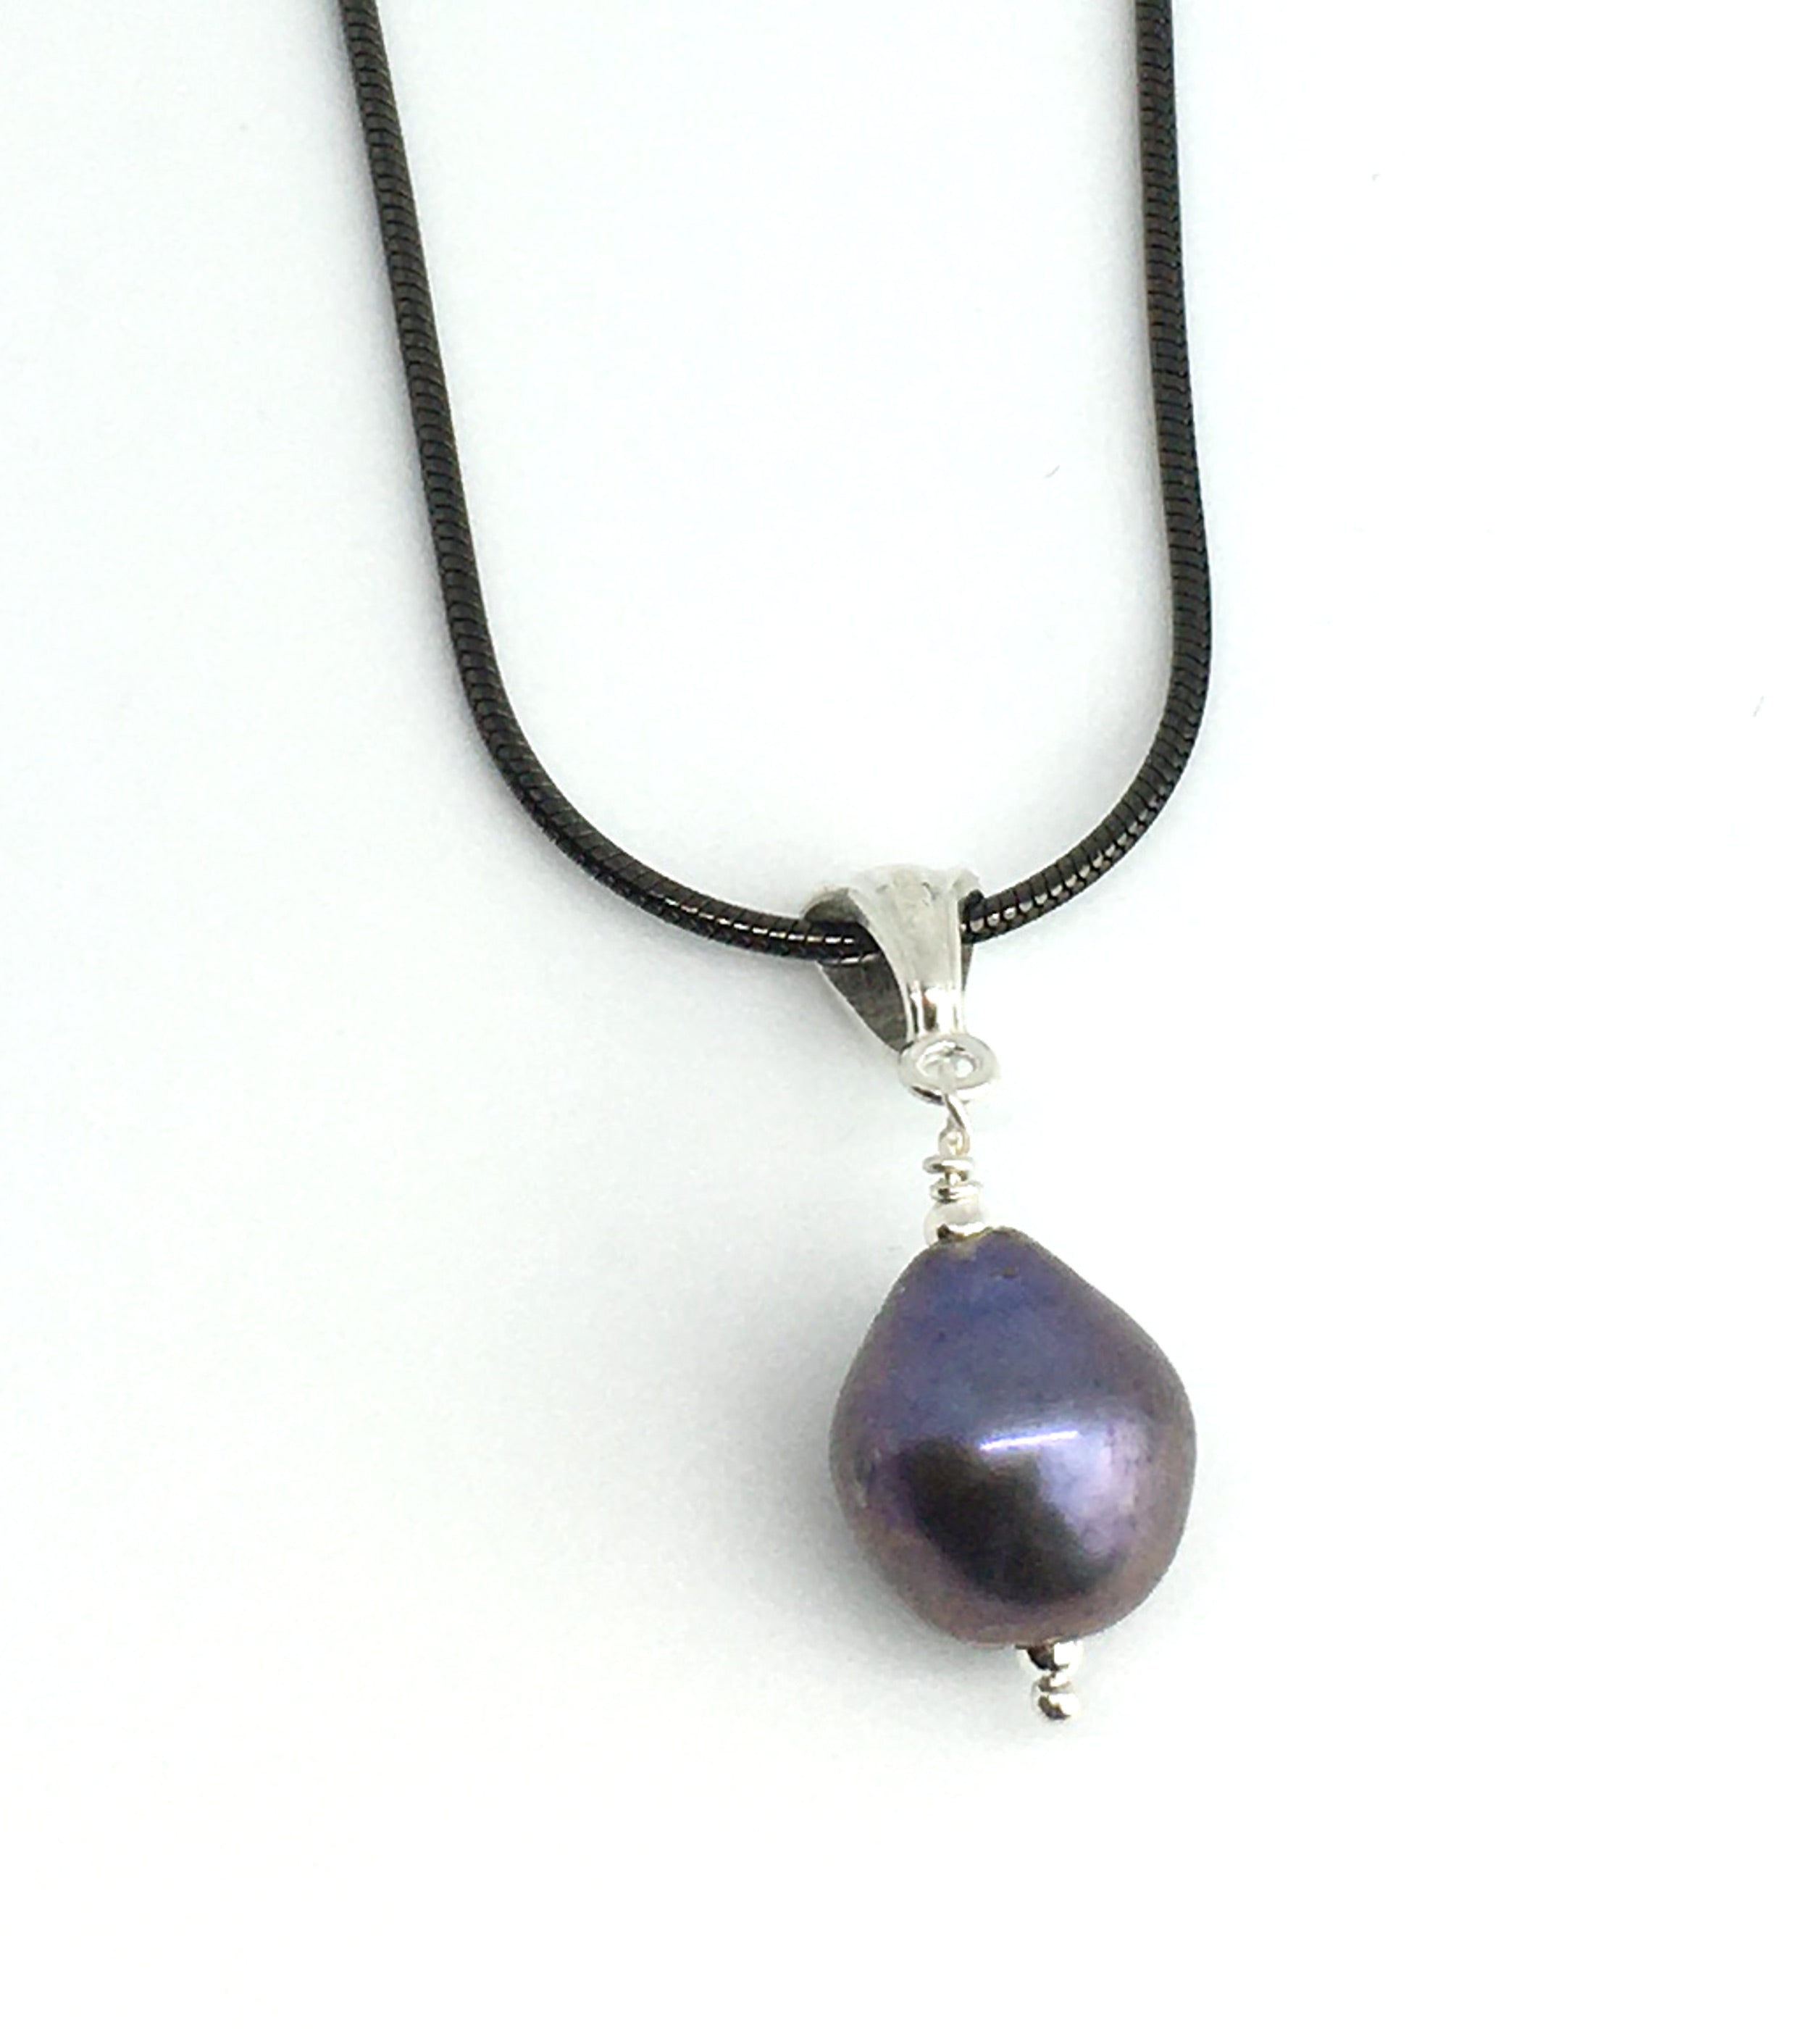 Peacock Pearl Pendant Necklace with Black Sterling Silver Snake Chain